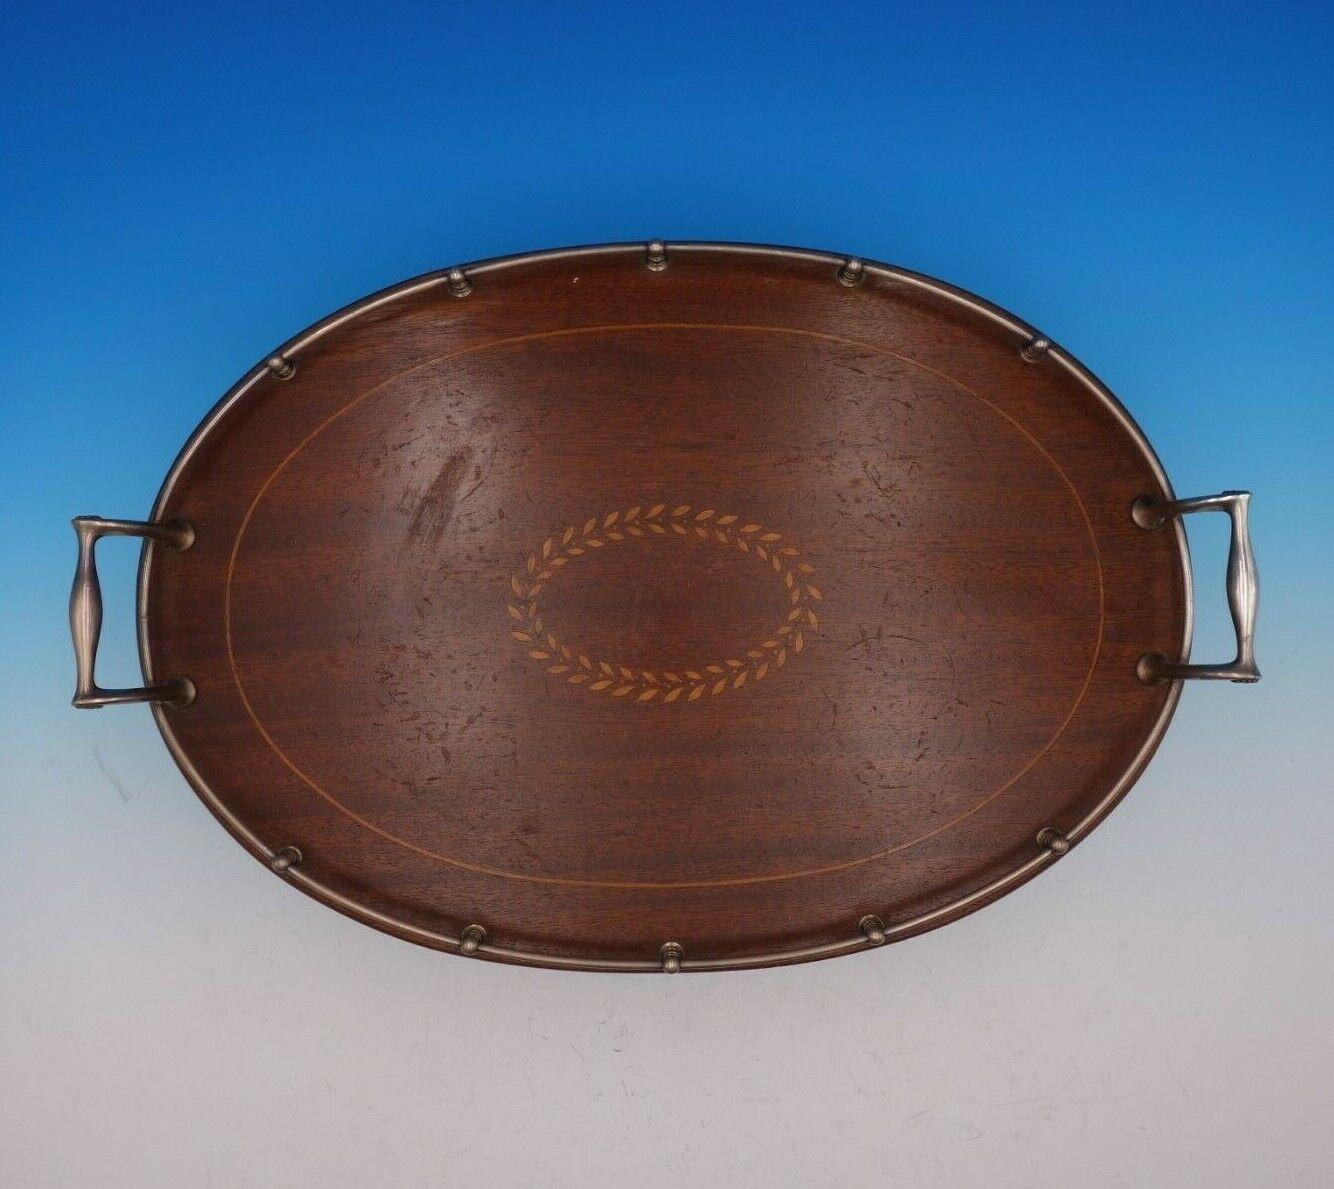 Faneuil by Tiffany & Co.

Superb Faneuil by Tiffany & Co. sterling silver and wood gallery tray marked #17931-6226. This tray features inlaid wood with a wreath cartouche. It has a date mark for 1907-1947.

The tray measures 18